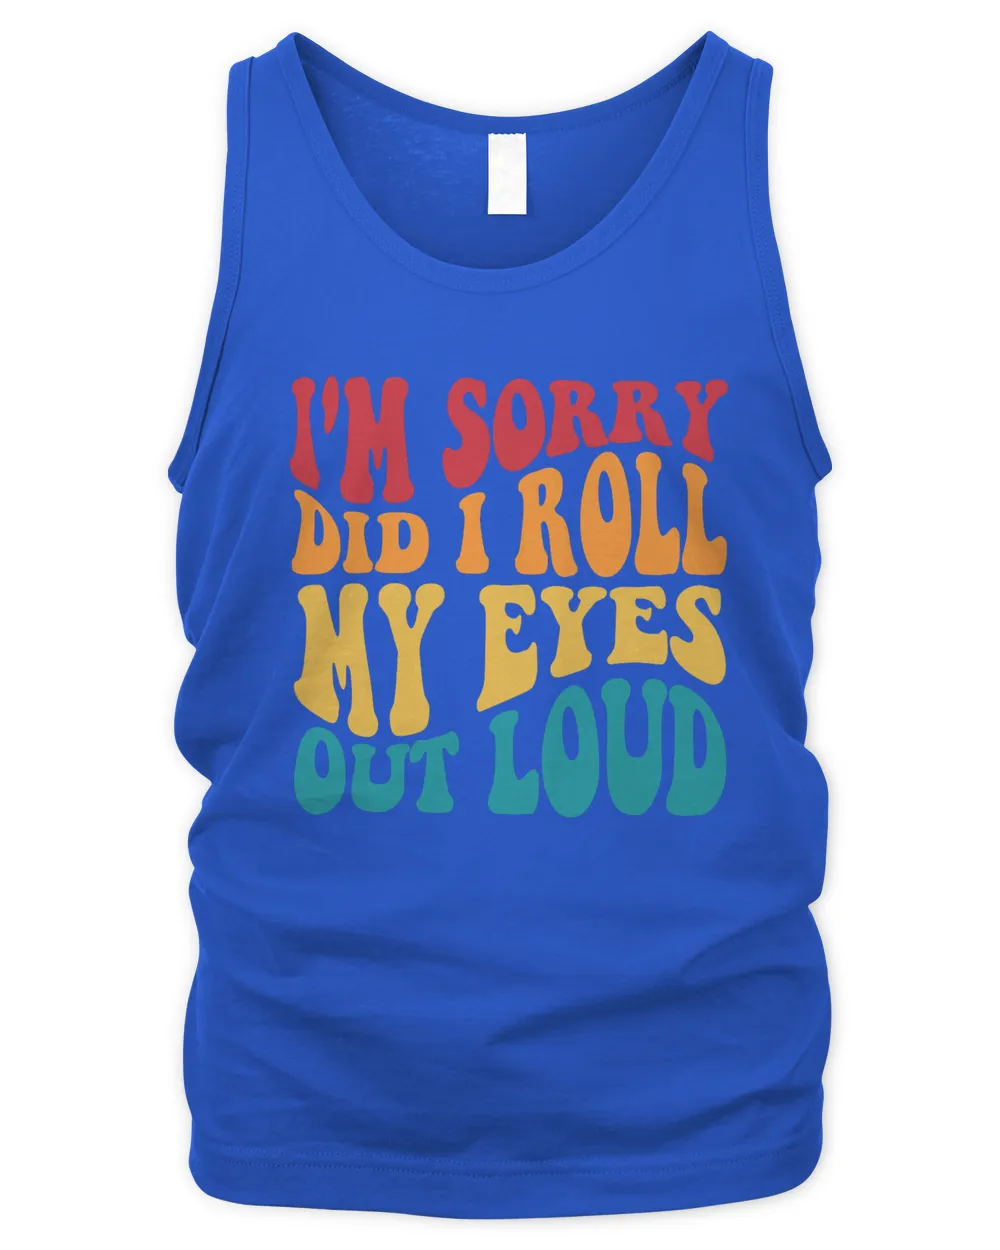 I'm Sorry Did I Roll My Eyes Out Loud Shirt